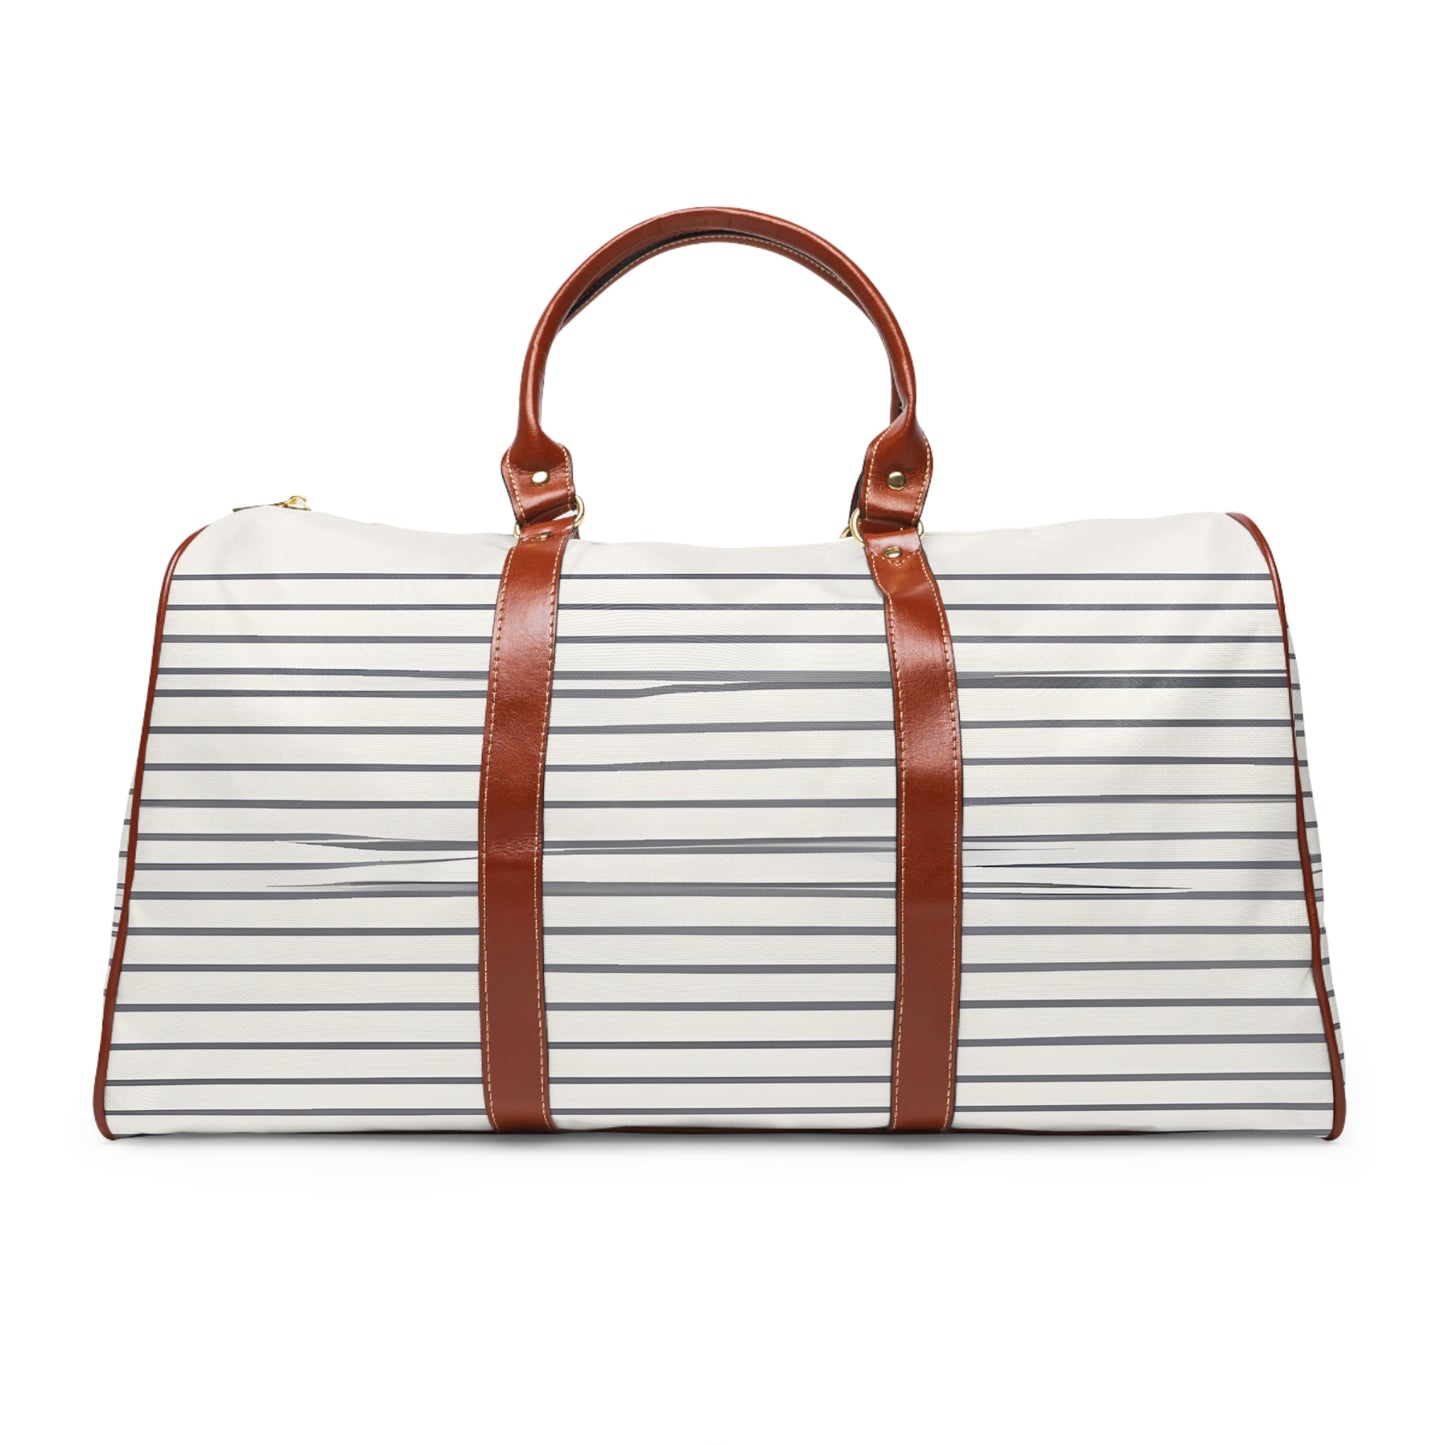 Lino Winifred - Water-resistant Travel Bag